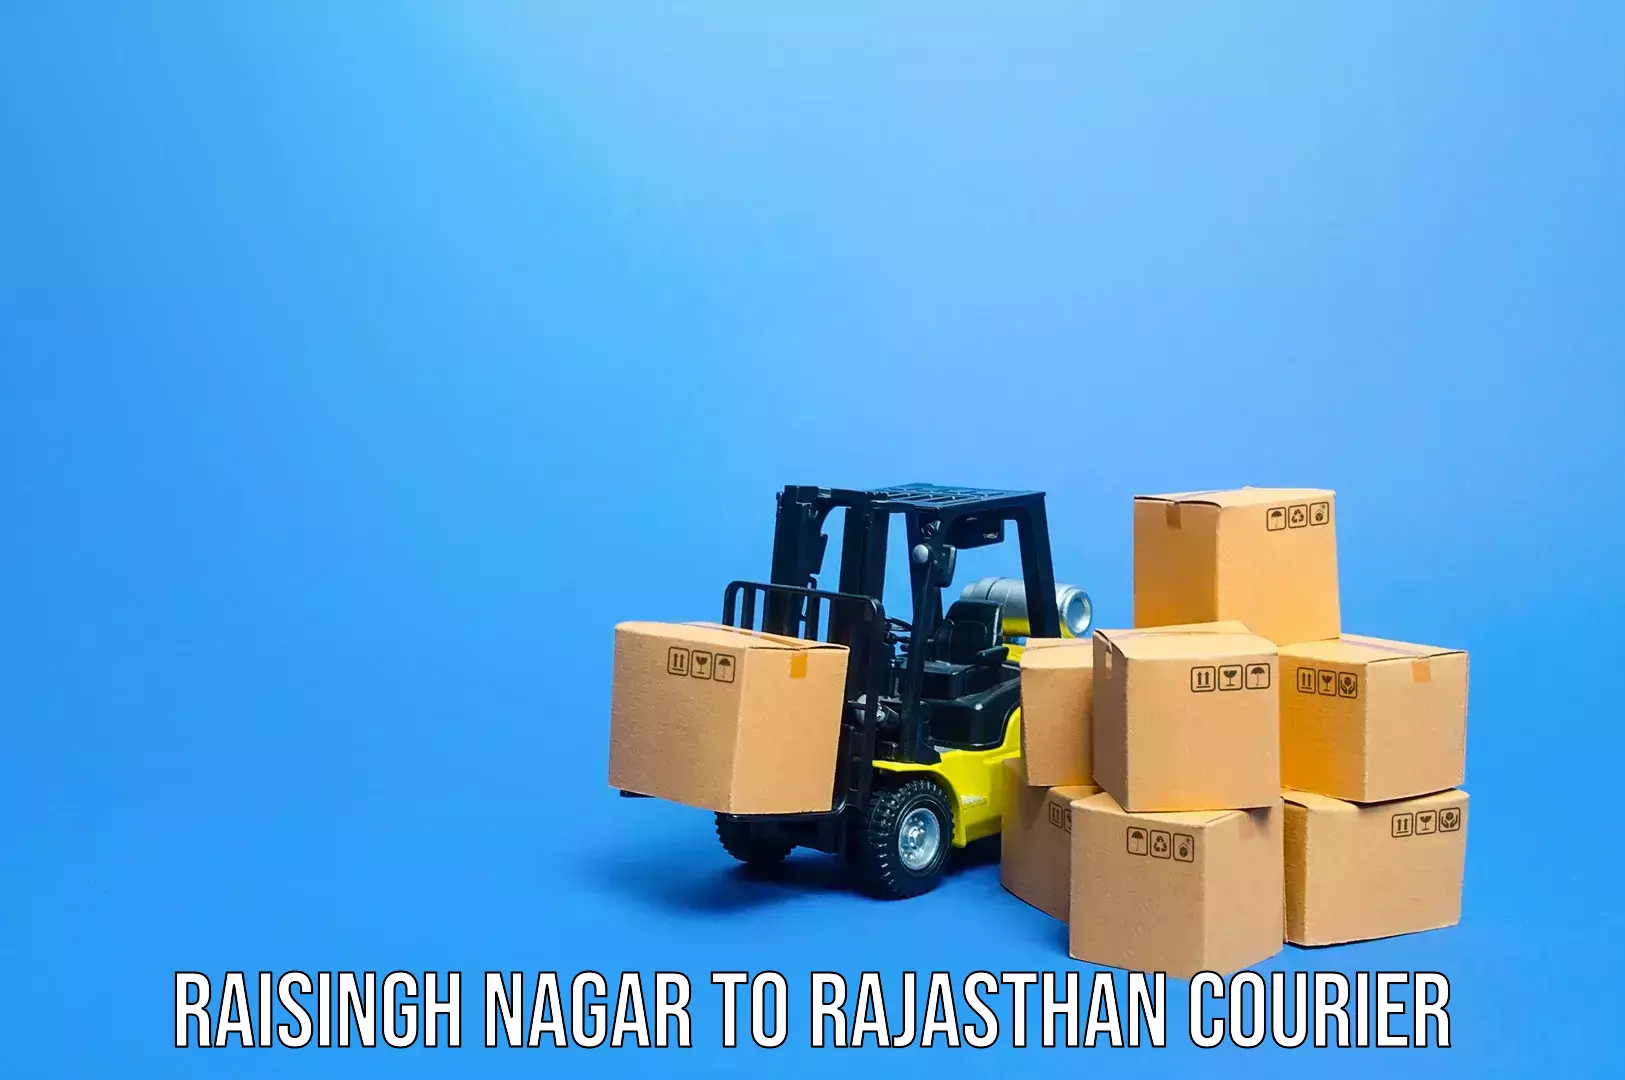 Premium luggage delivery in Raisingh Nagar to Birla Institute of Technology and Science Pilani